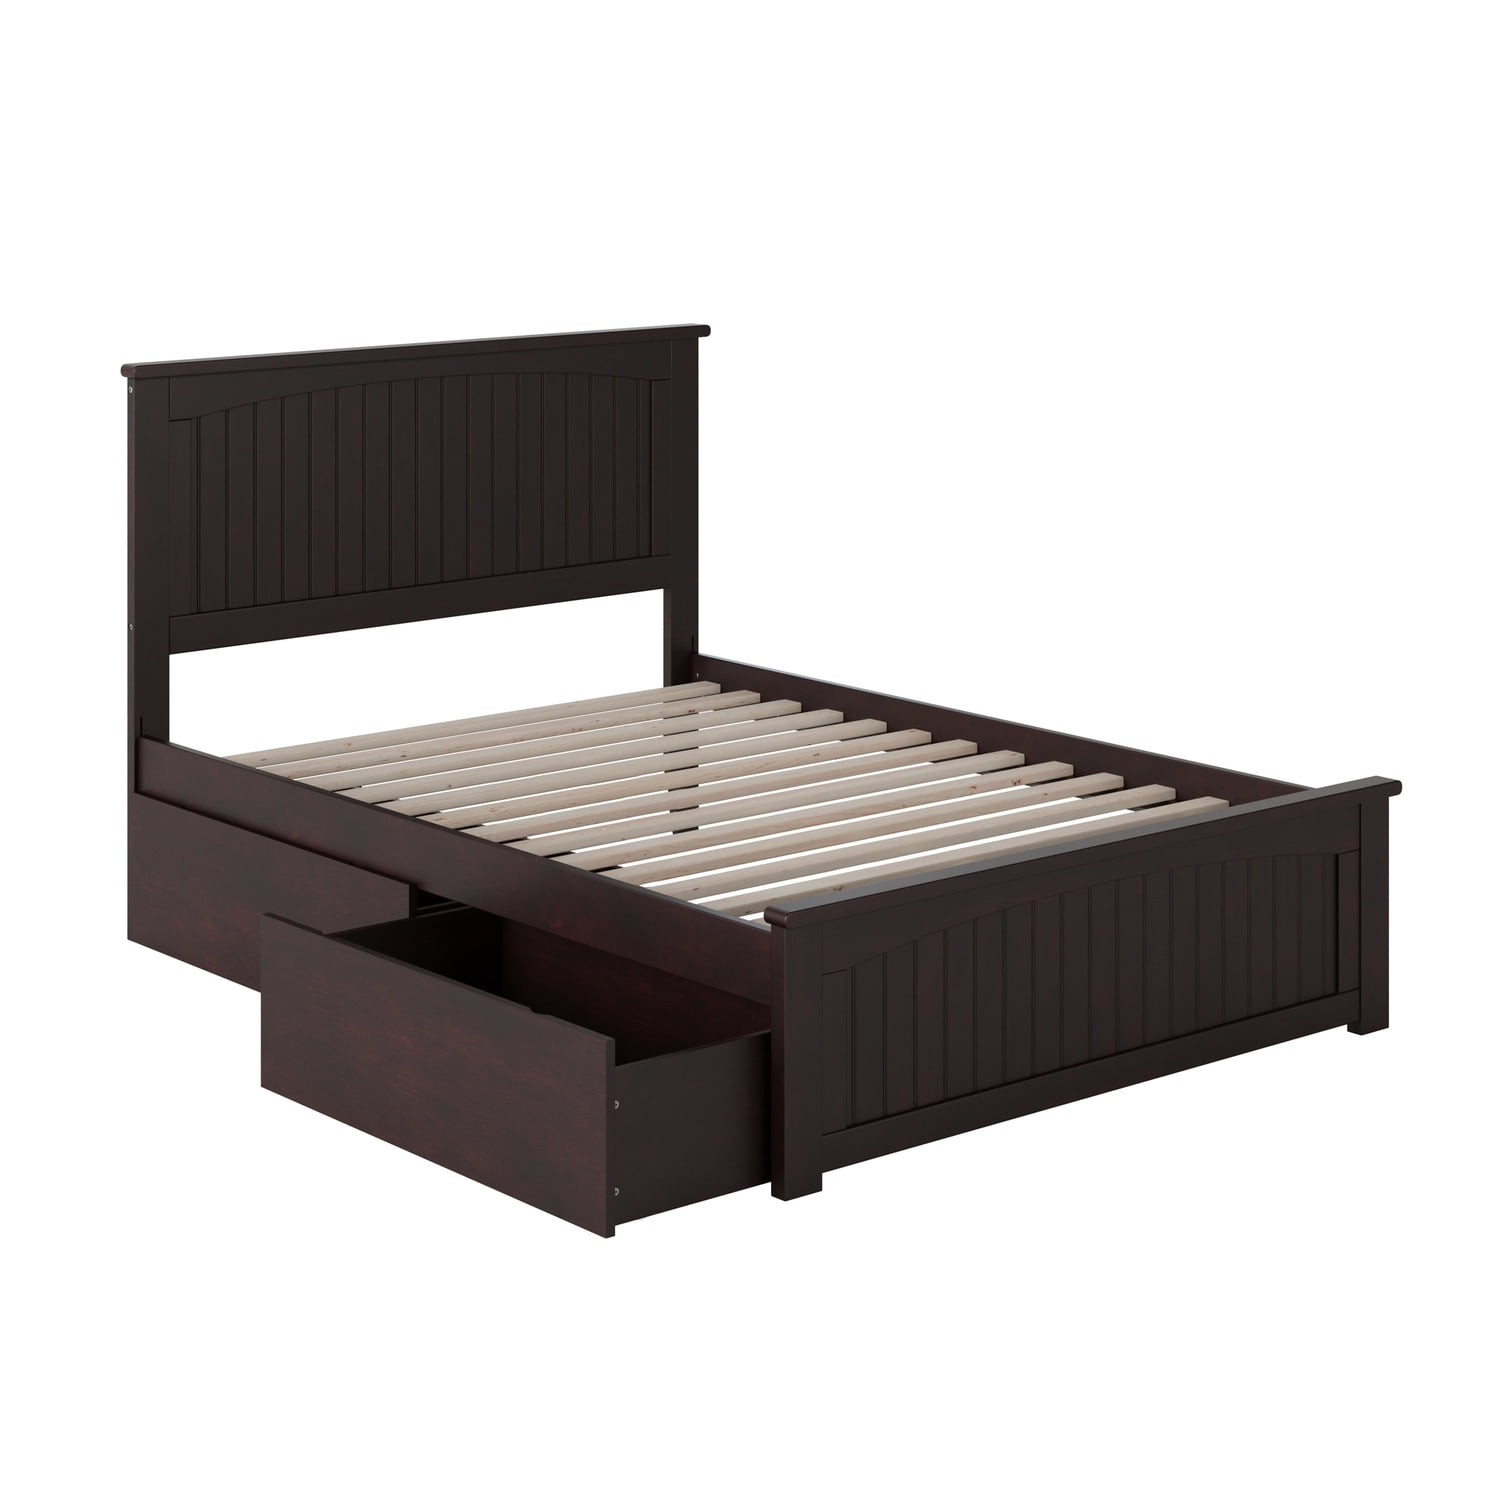 Picture of Atlantic Furniture AR8236111 Nantucket Match Footboard with Urban Bed Drawers x 1 - Espresso, Full Size